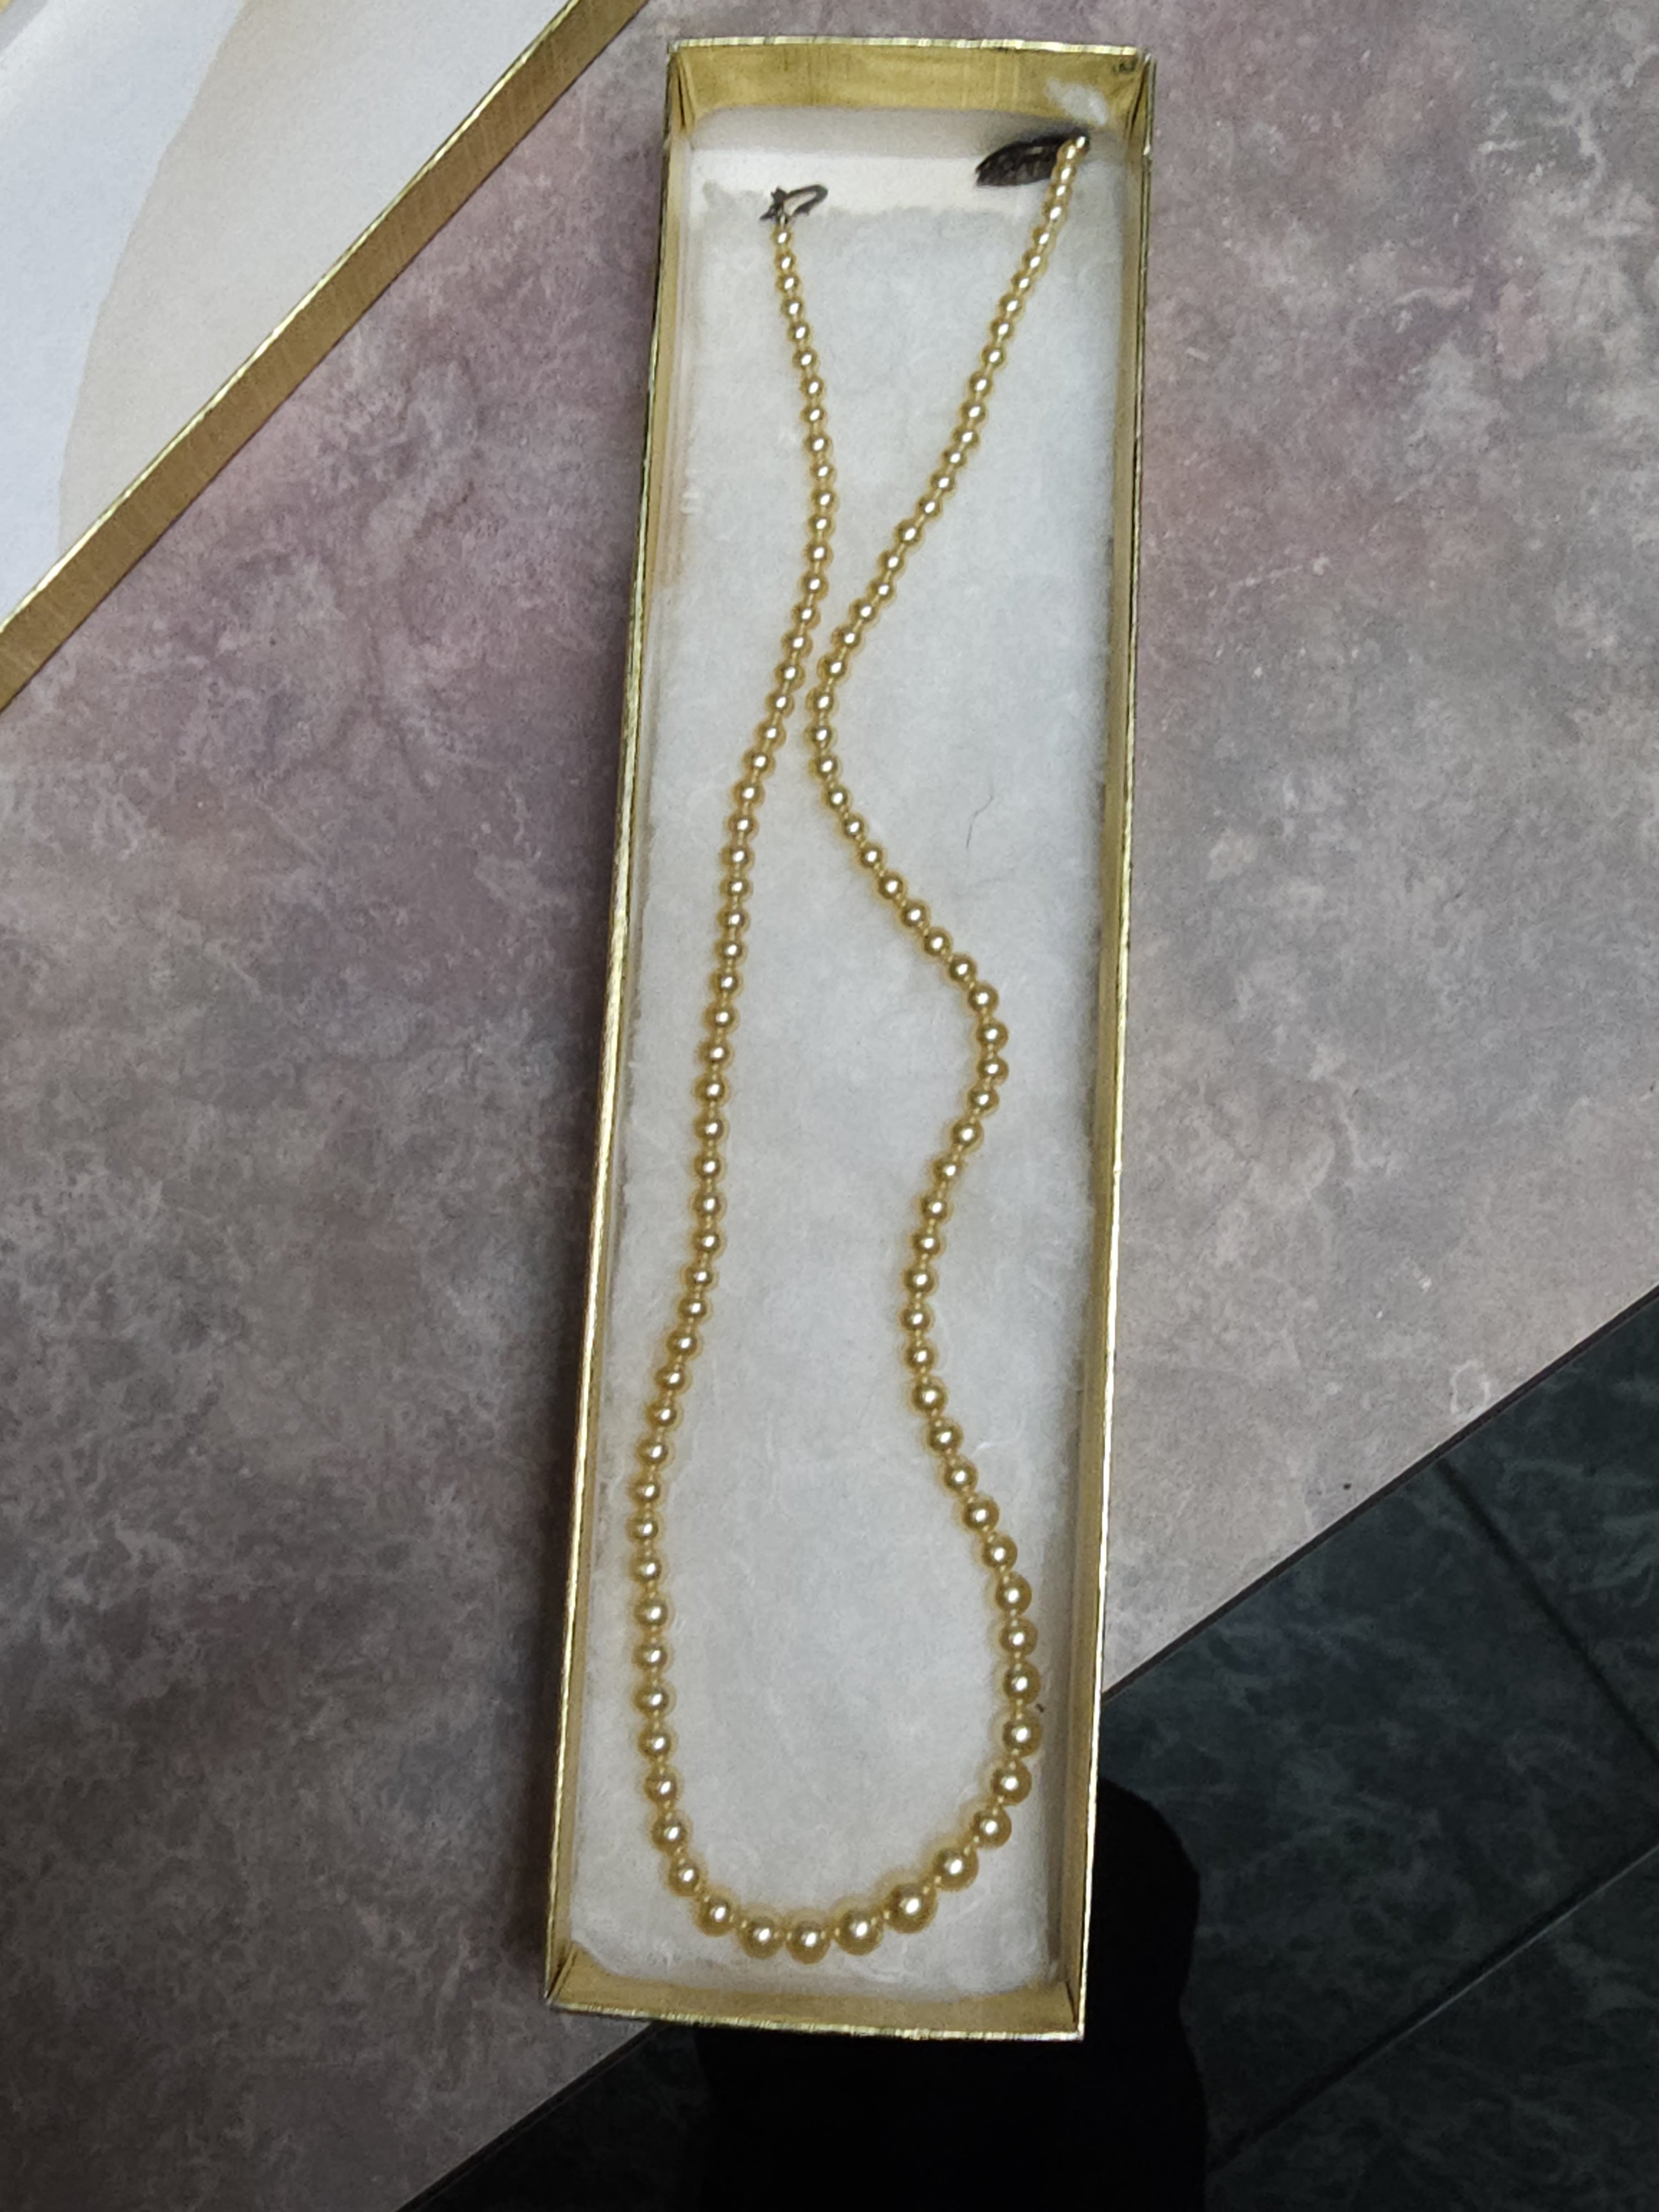 Pearls passed down from grandmother help identifying what kind they are